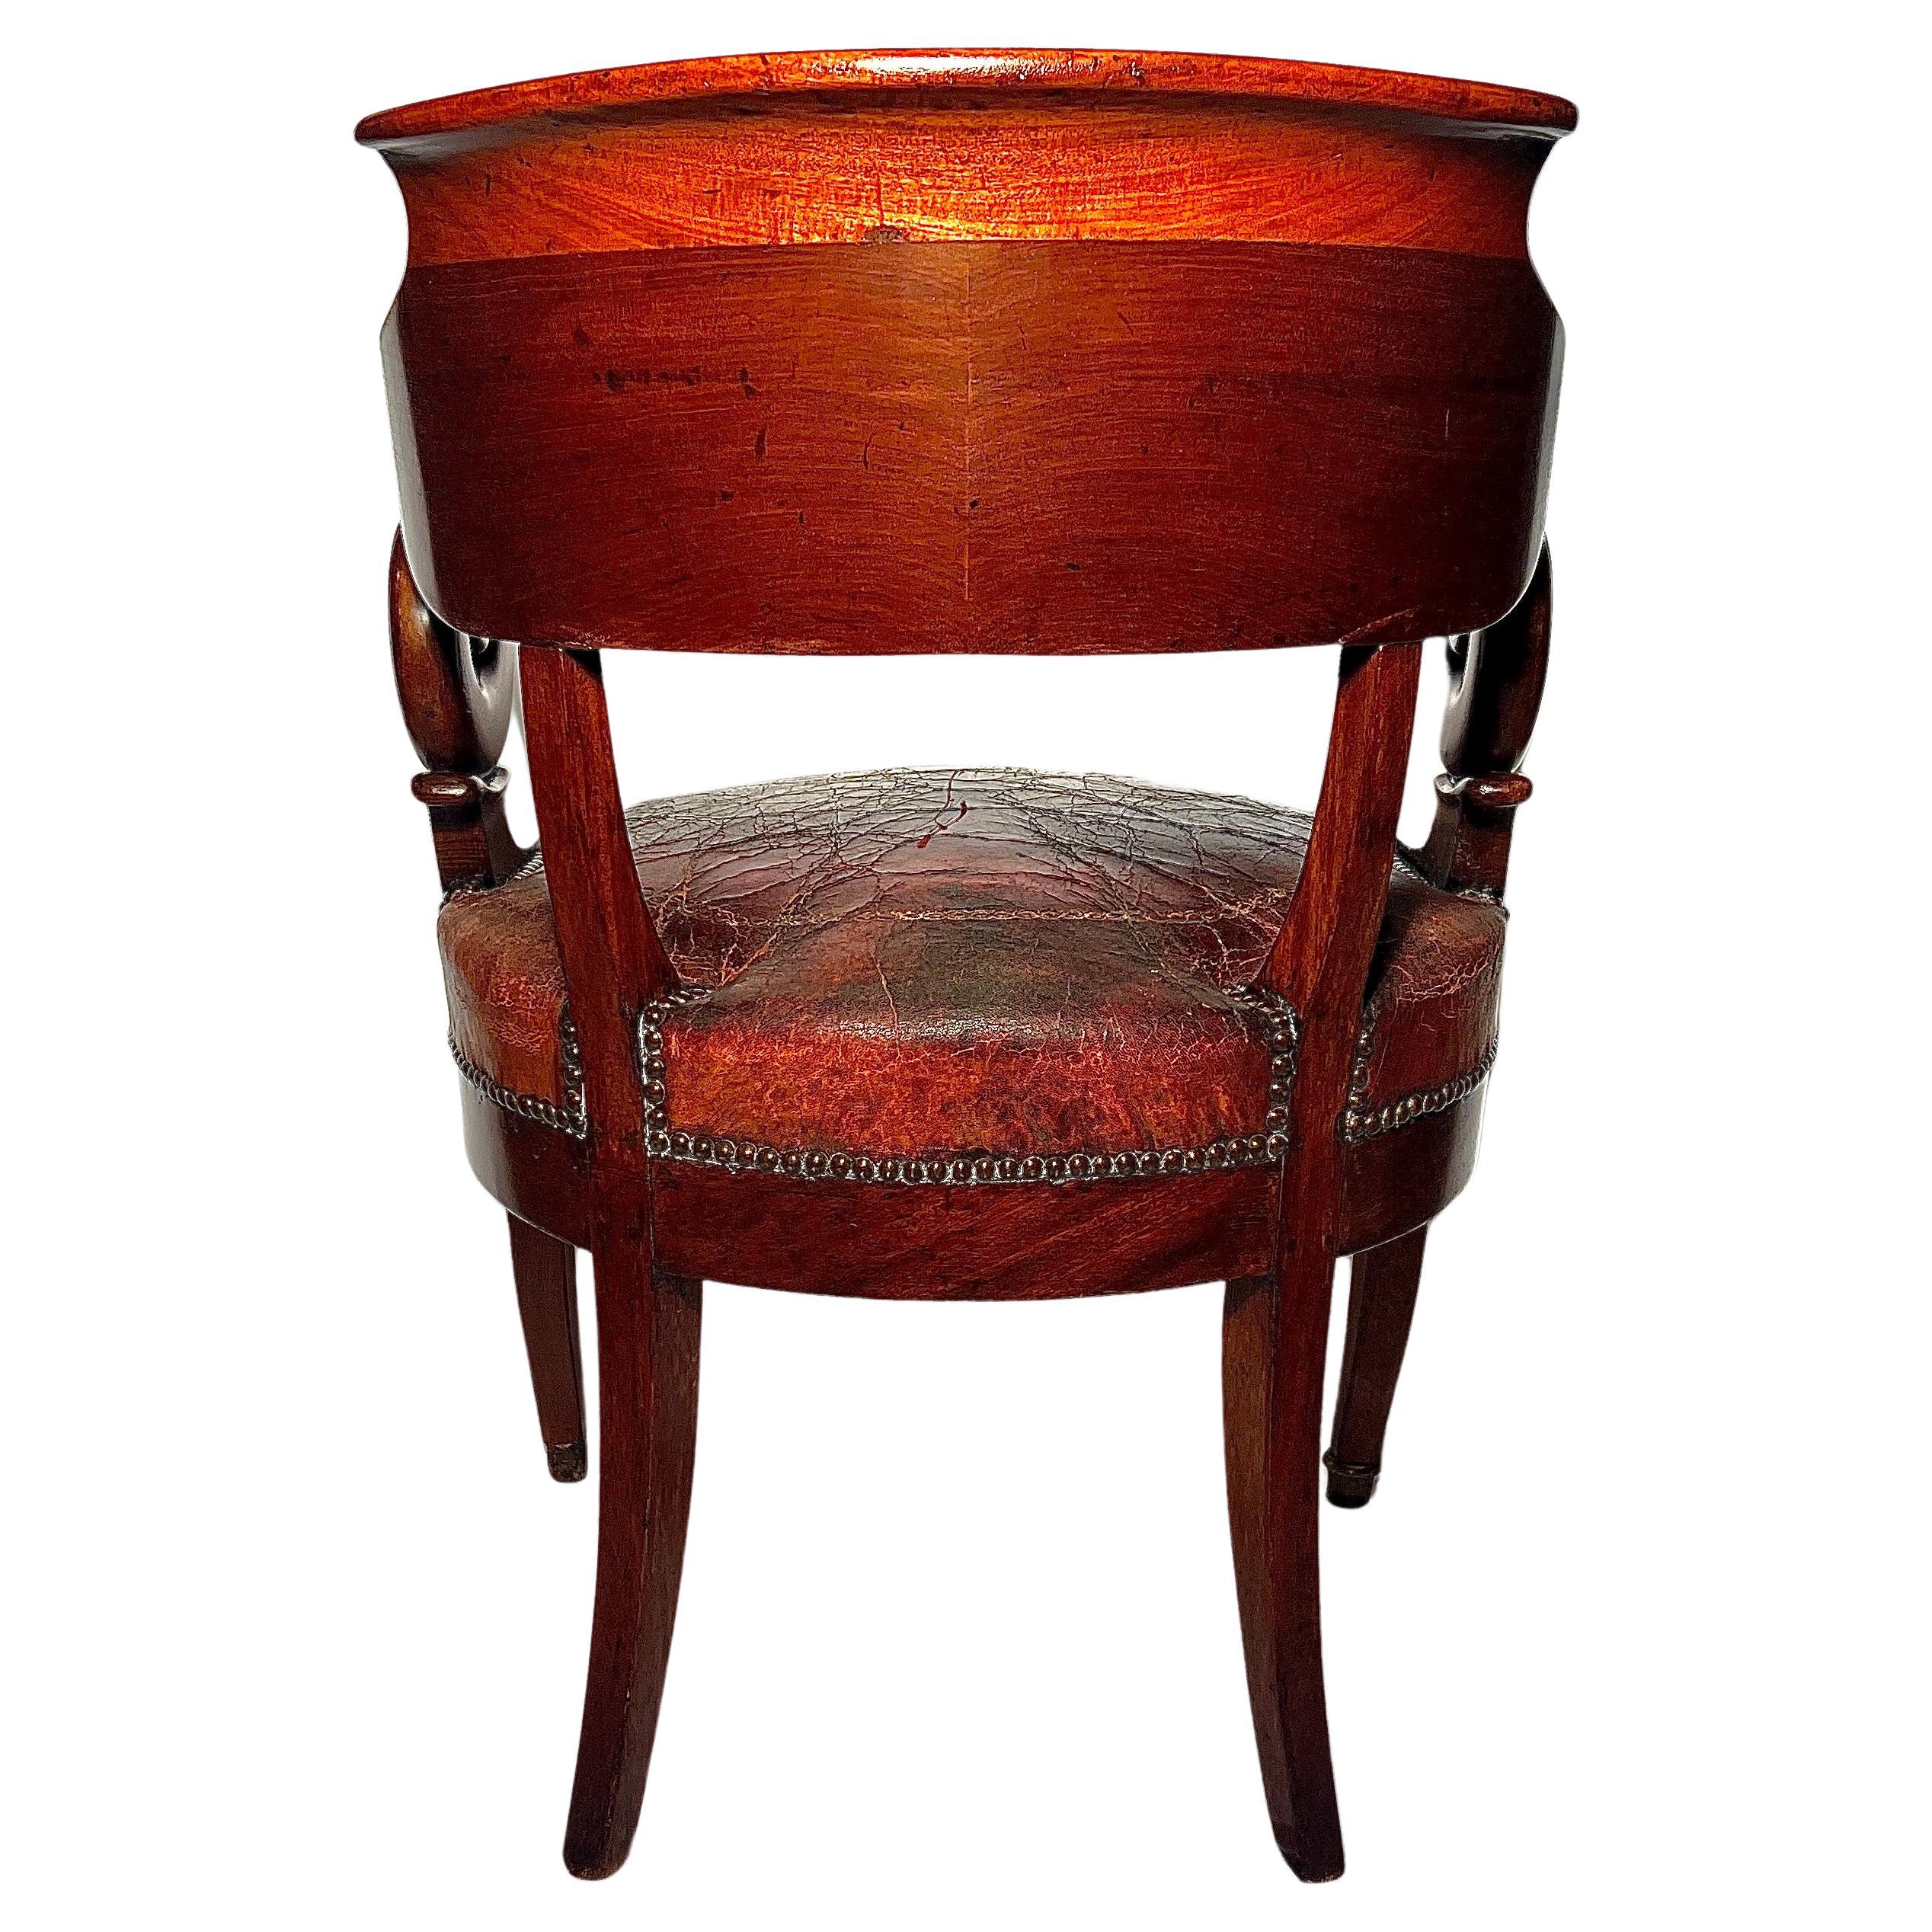 19th Century Antique English Solid Mahogany and Leather Desk Chair, Circa 1820. For Sale